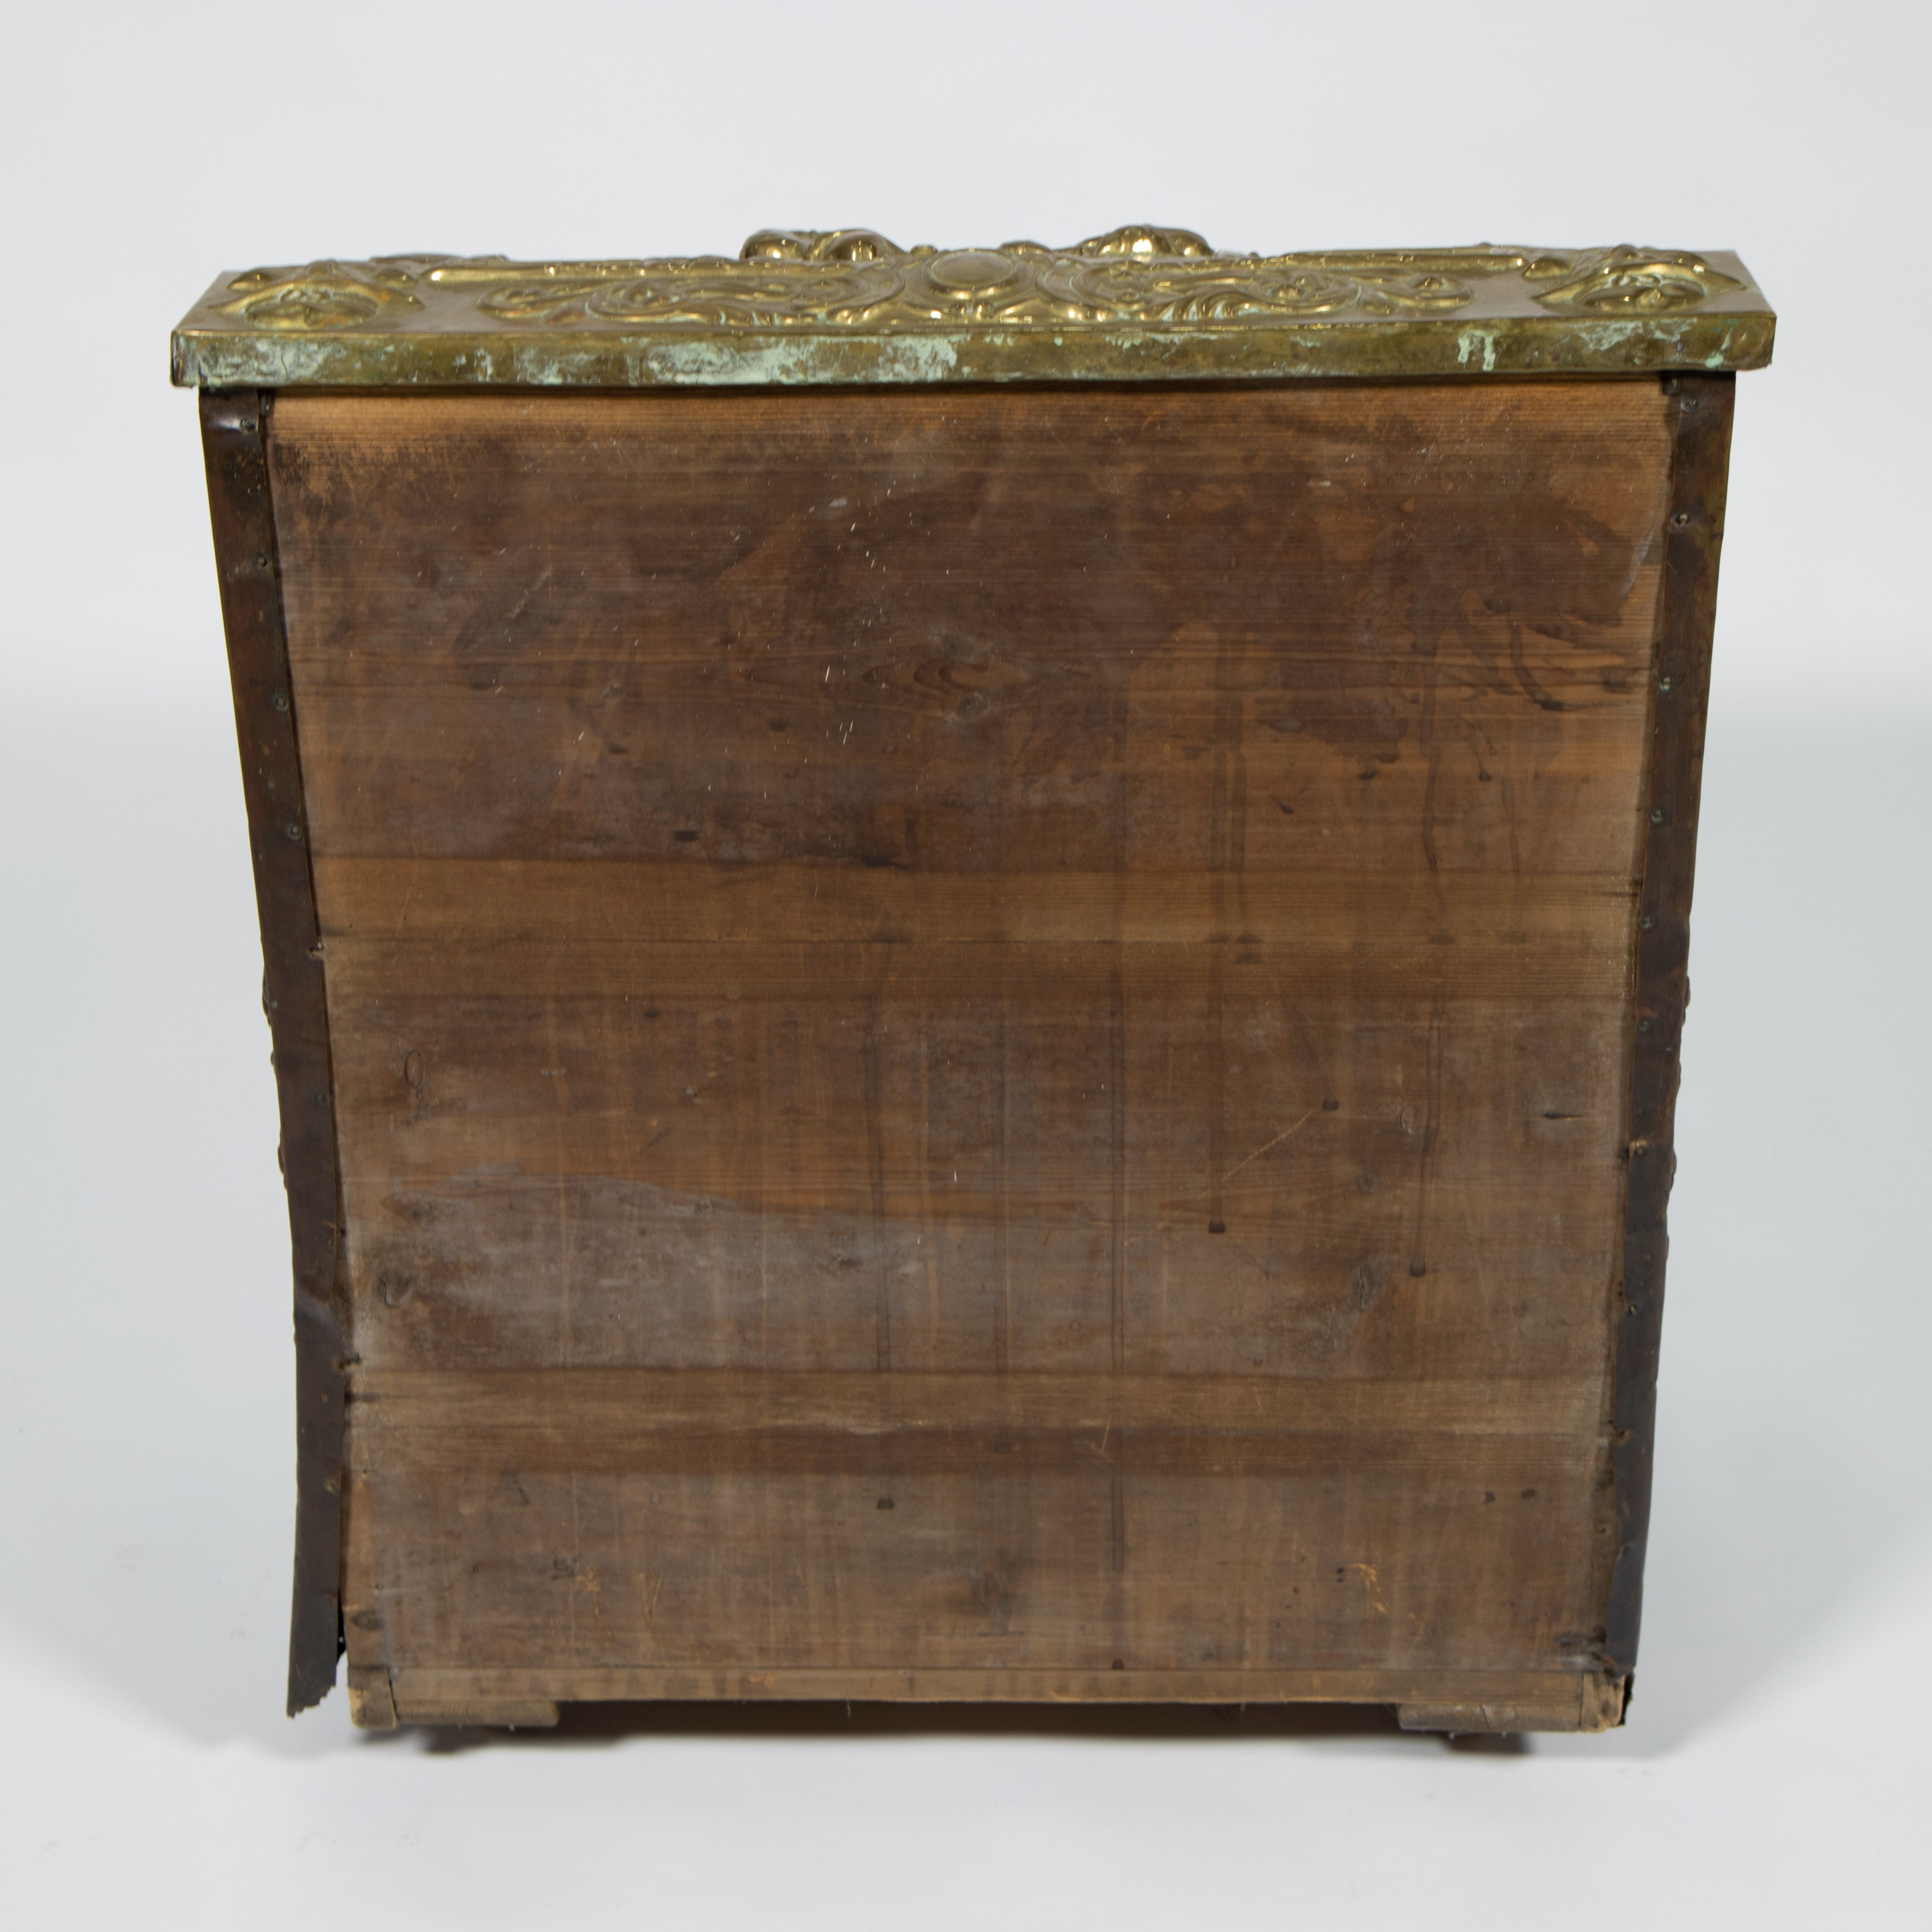 Wooden case with copper fittings, signed - Image 4 of 6